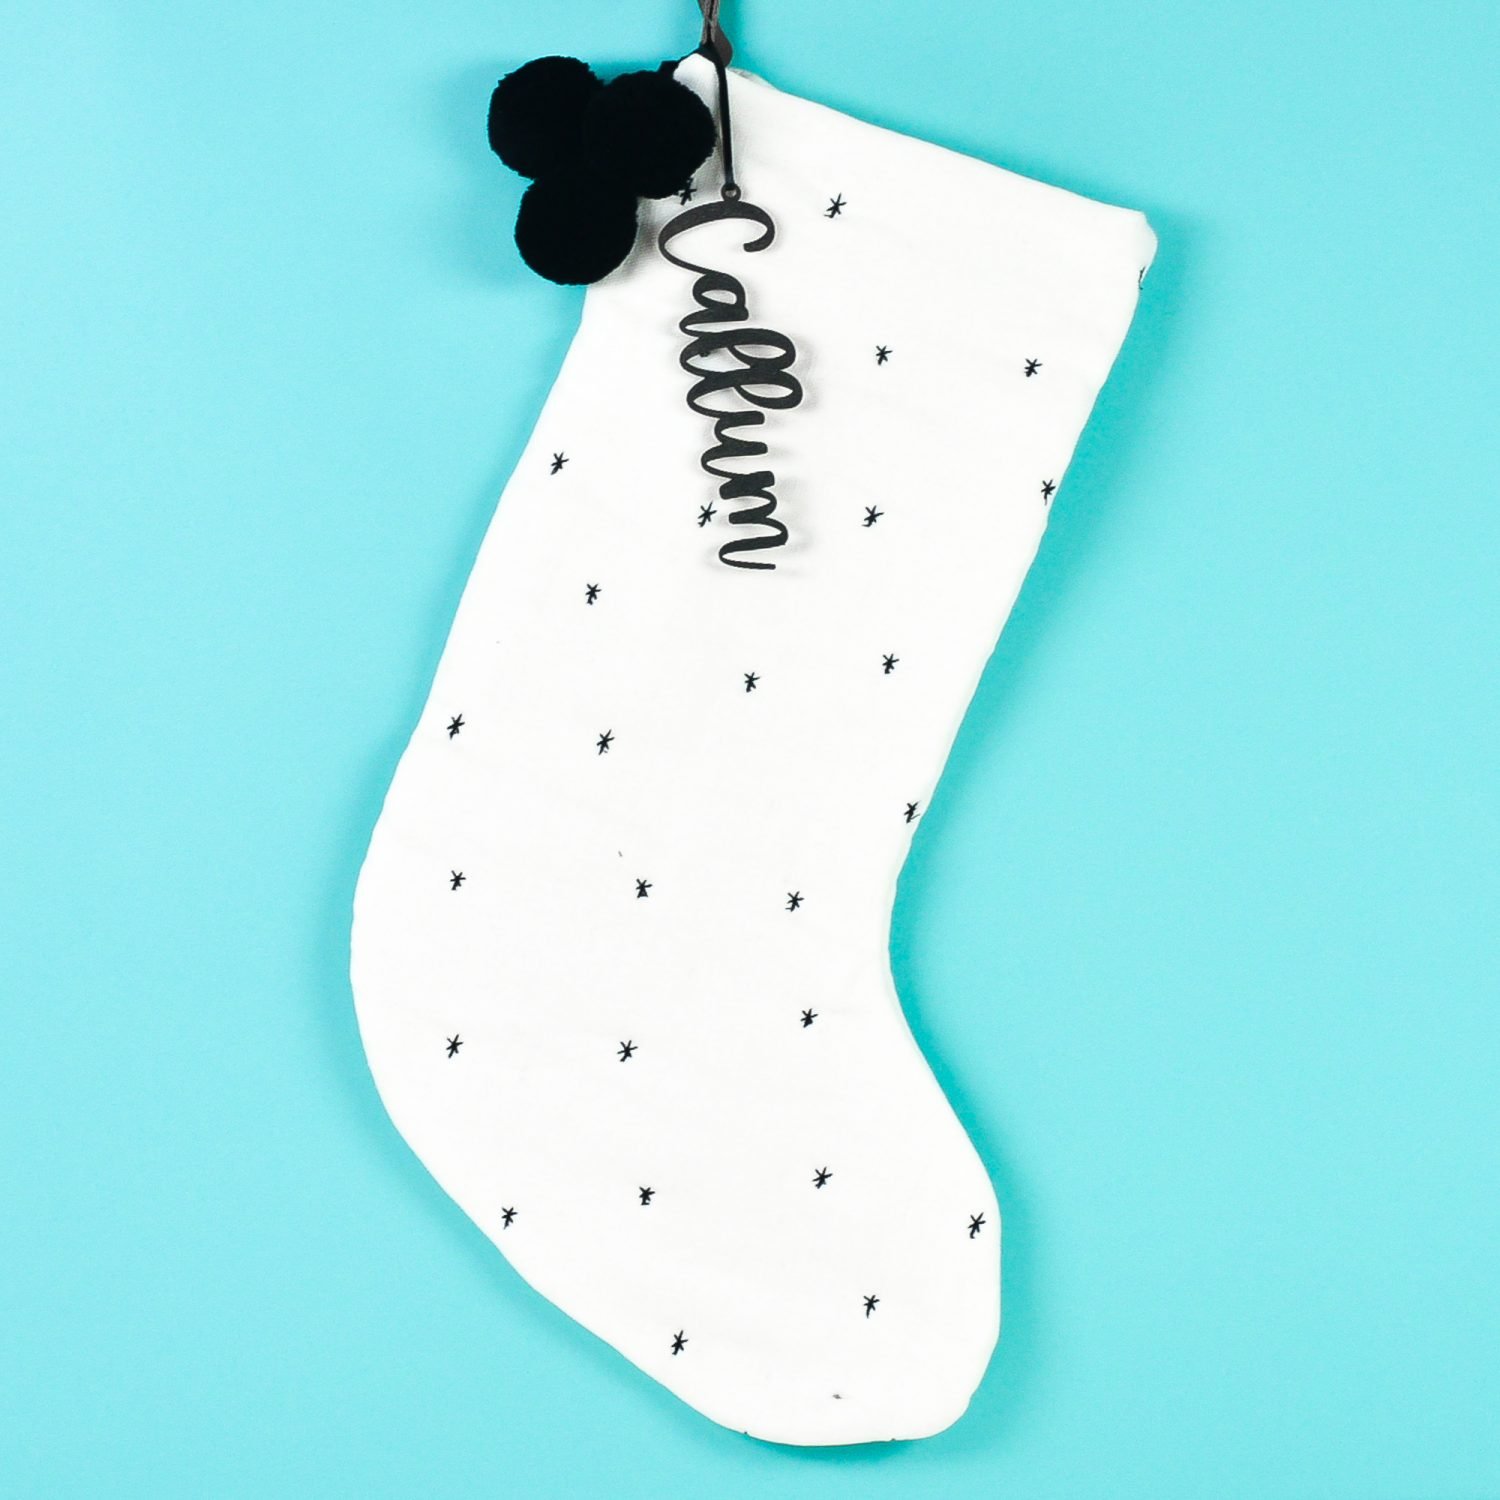 White stocking with black "Callum" personalized stocking tag on teal background